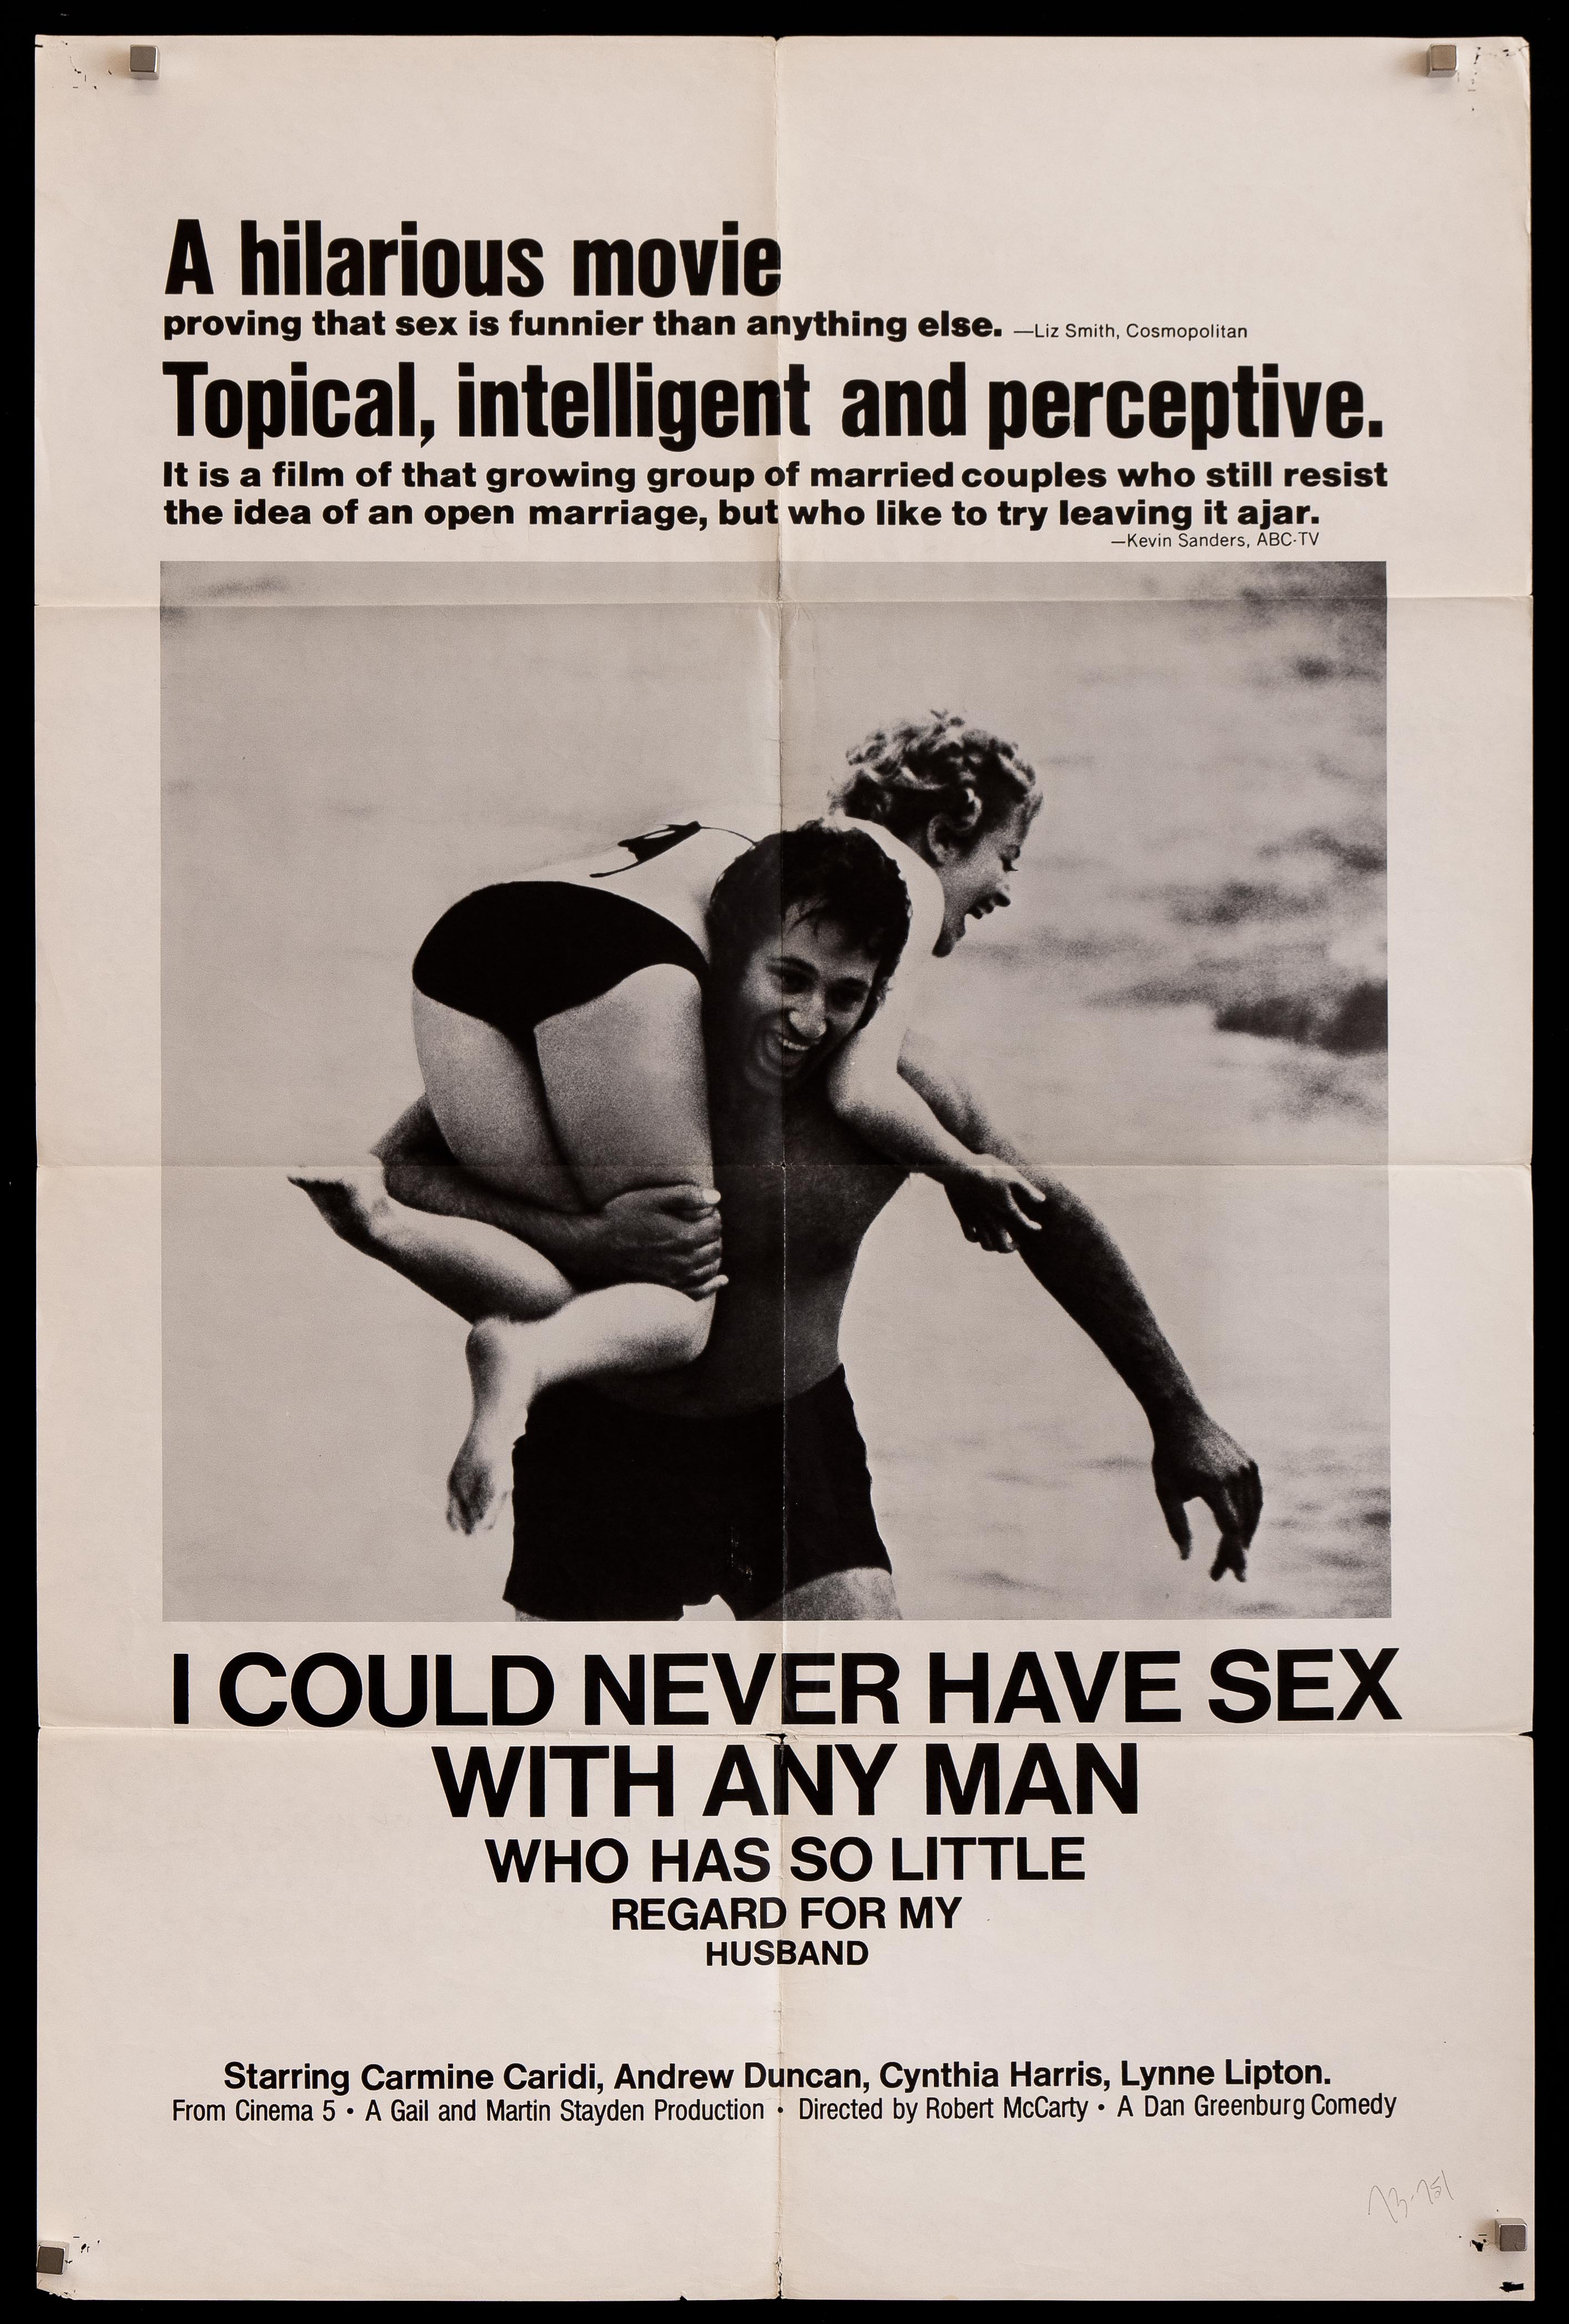 I Could Never Have Sex Movie Poster 1973 1 Sheet (27x41)